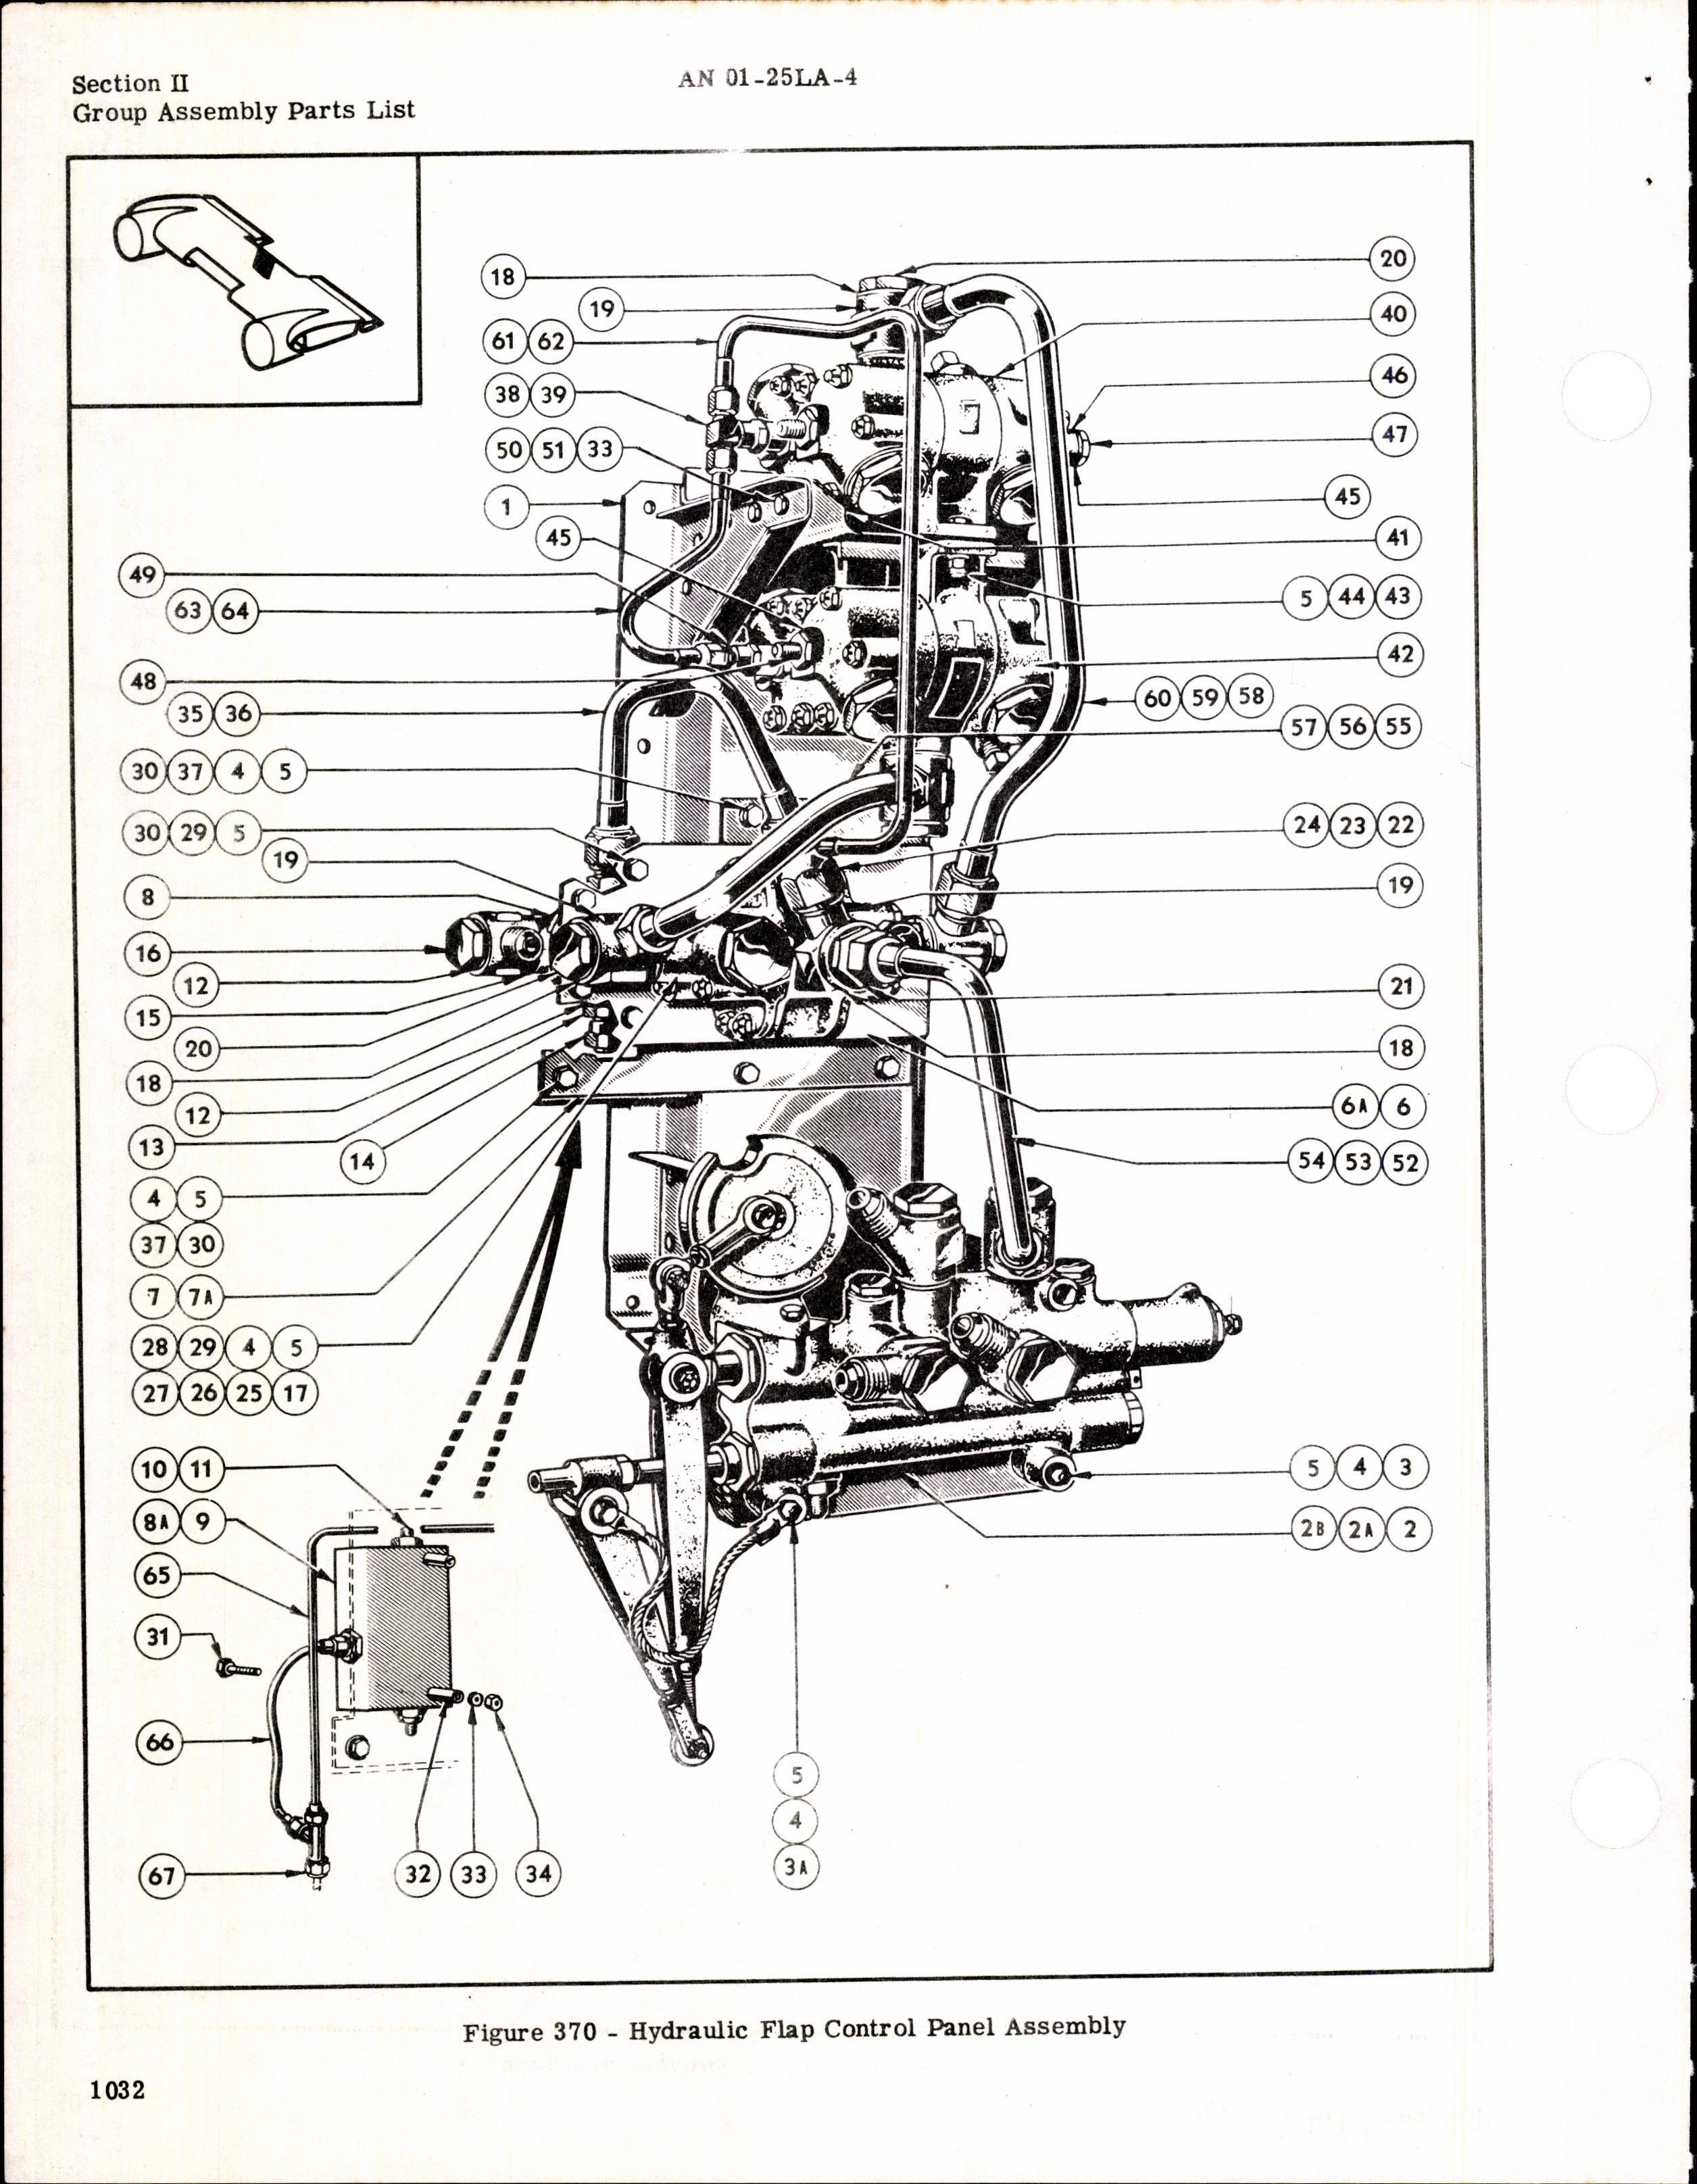 Sample page 14 from AirCorps Library document: Illustrated Parts Breakdown for C-46A, C-46D, & R5C-1